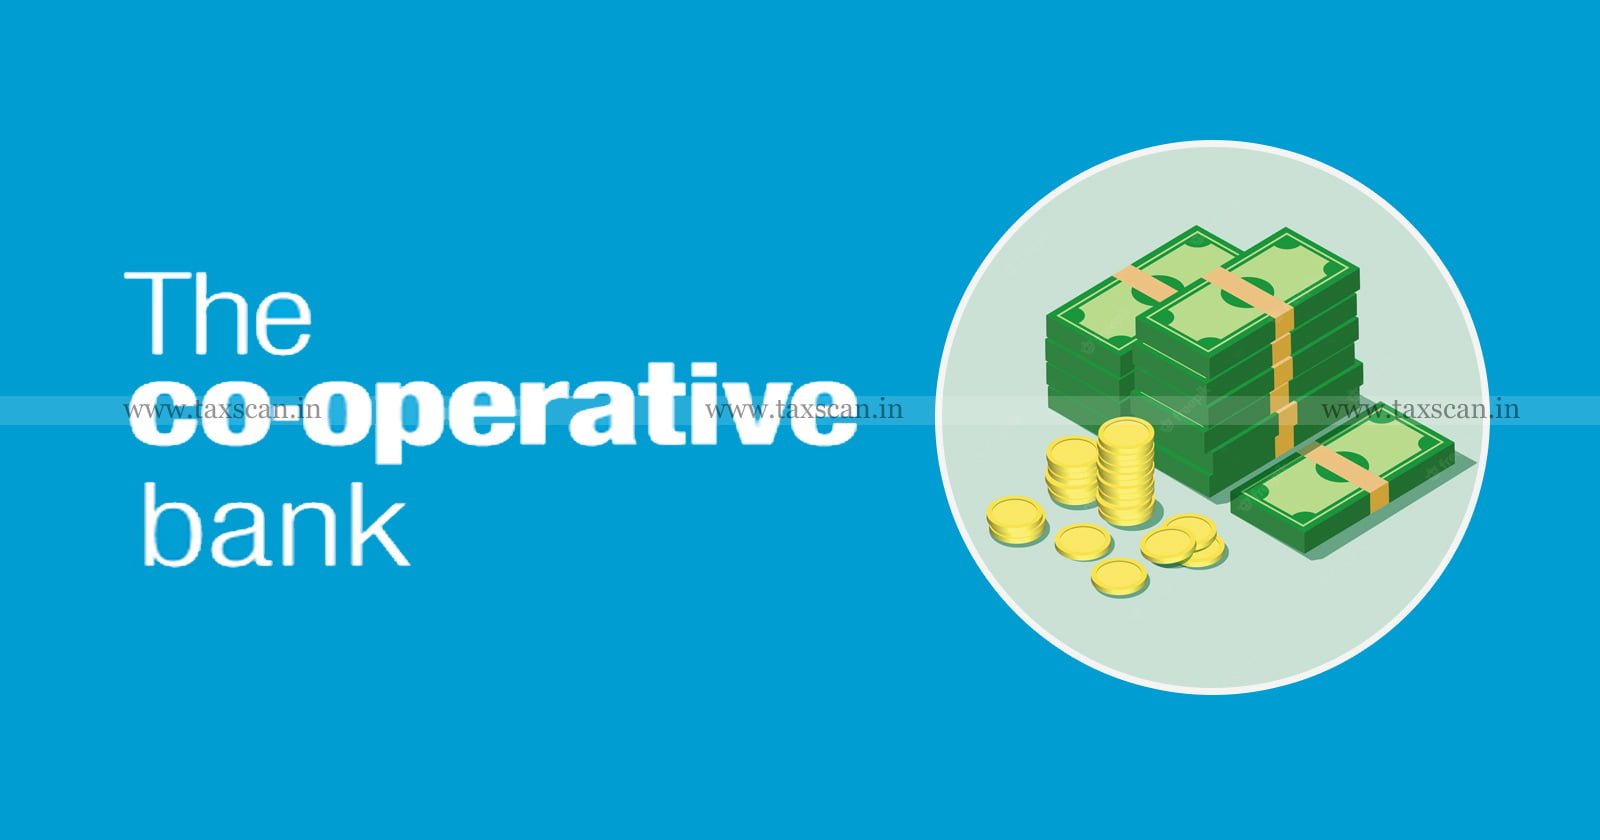 Co-operative Banks - Co-operative Societies - Banking Business - RBI - Deduction - ITAT - Income Tax - Taxscan